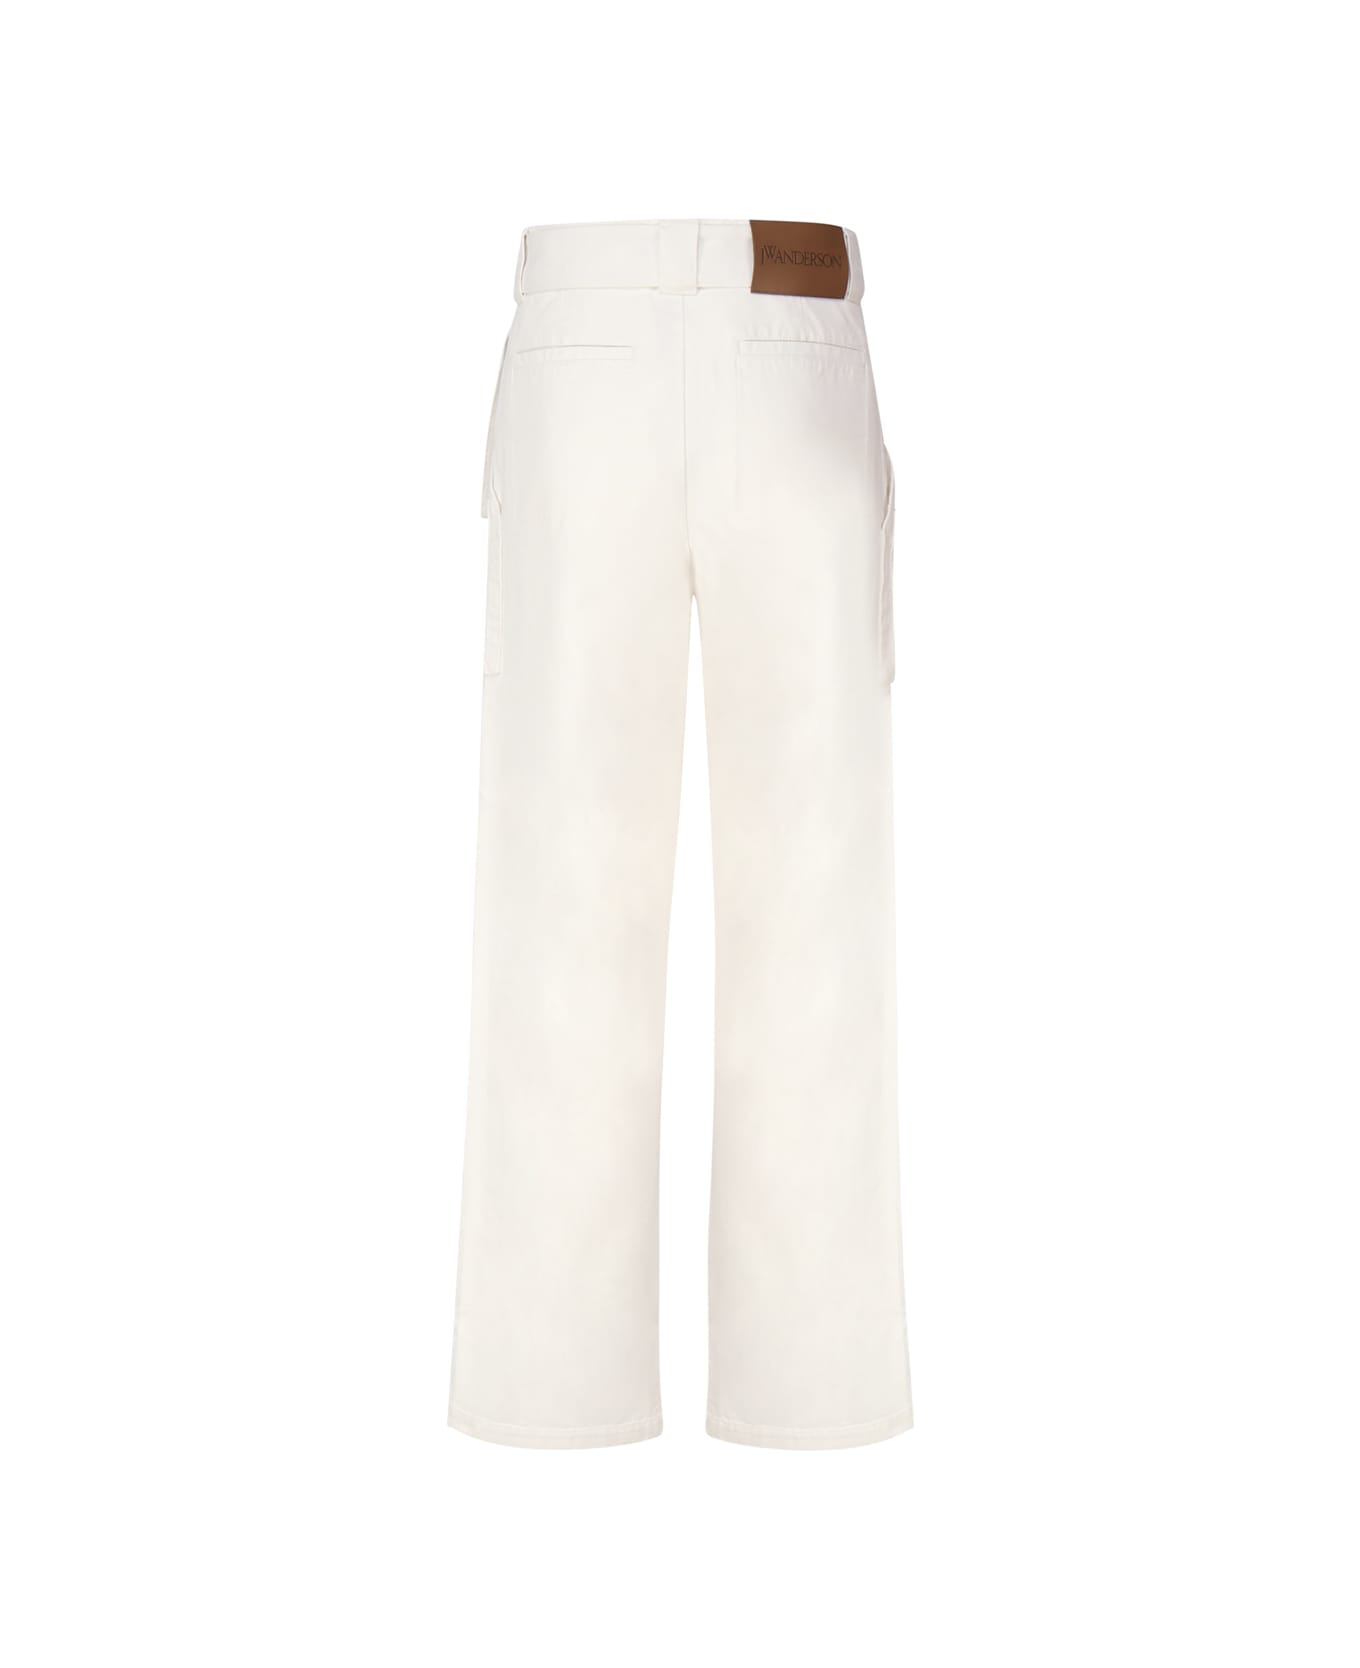 J.W. Anderson Cargo With Belt - White